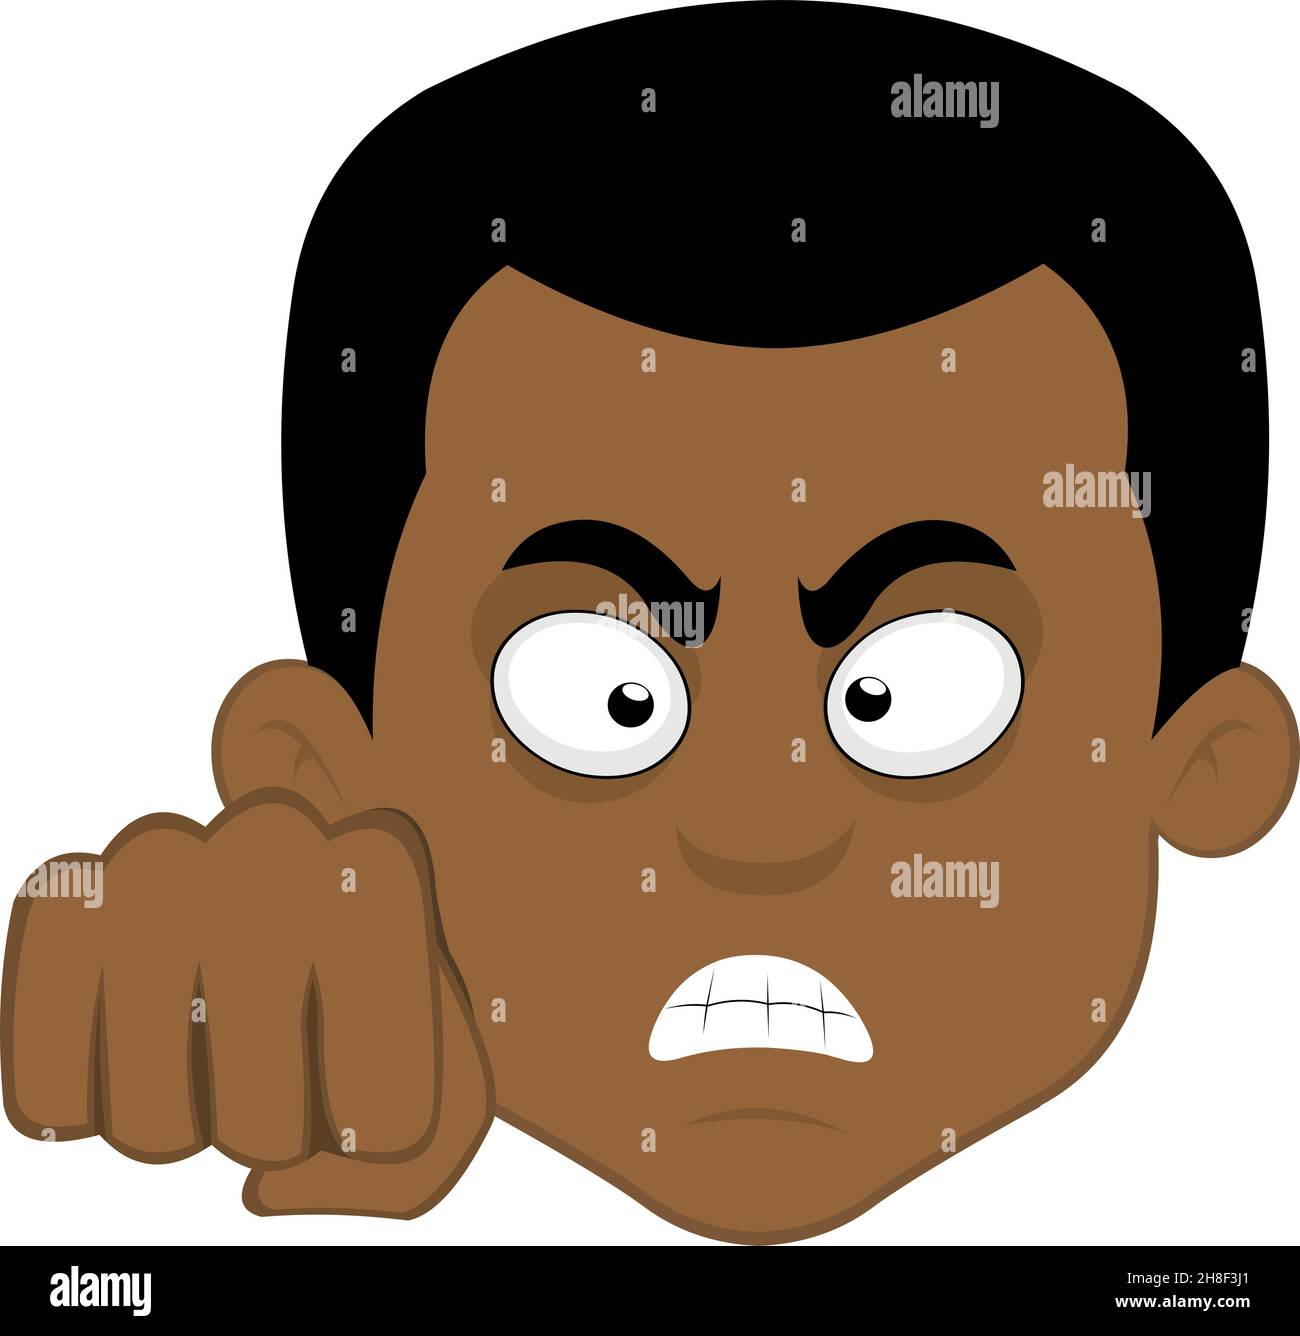 Vector illustration of a cartoon man's face with an angry expression and giving a fist bump Stock Vector